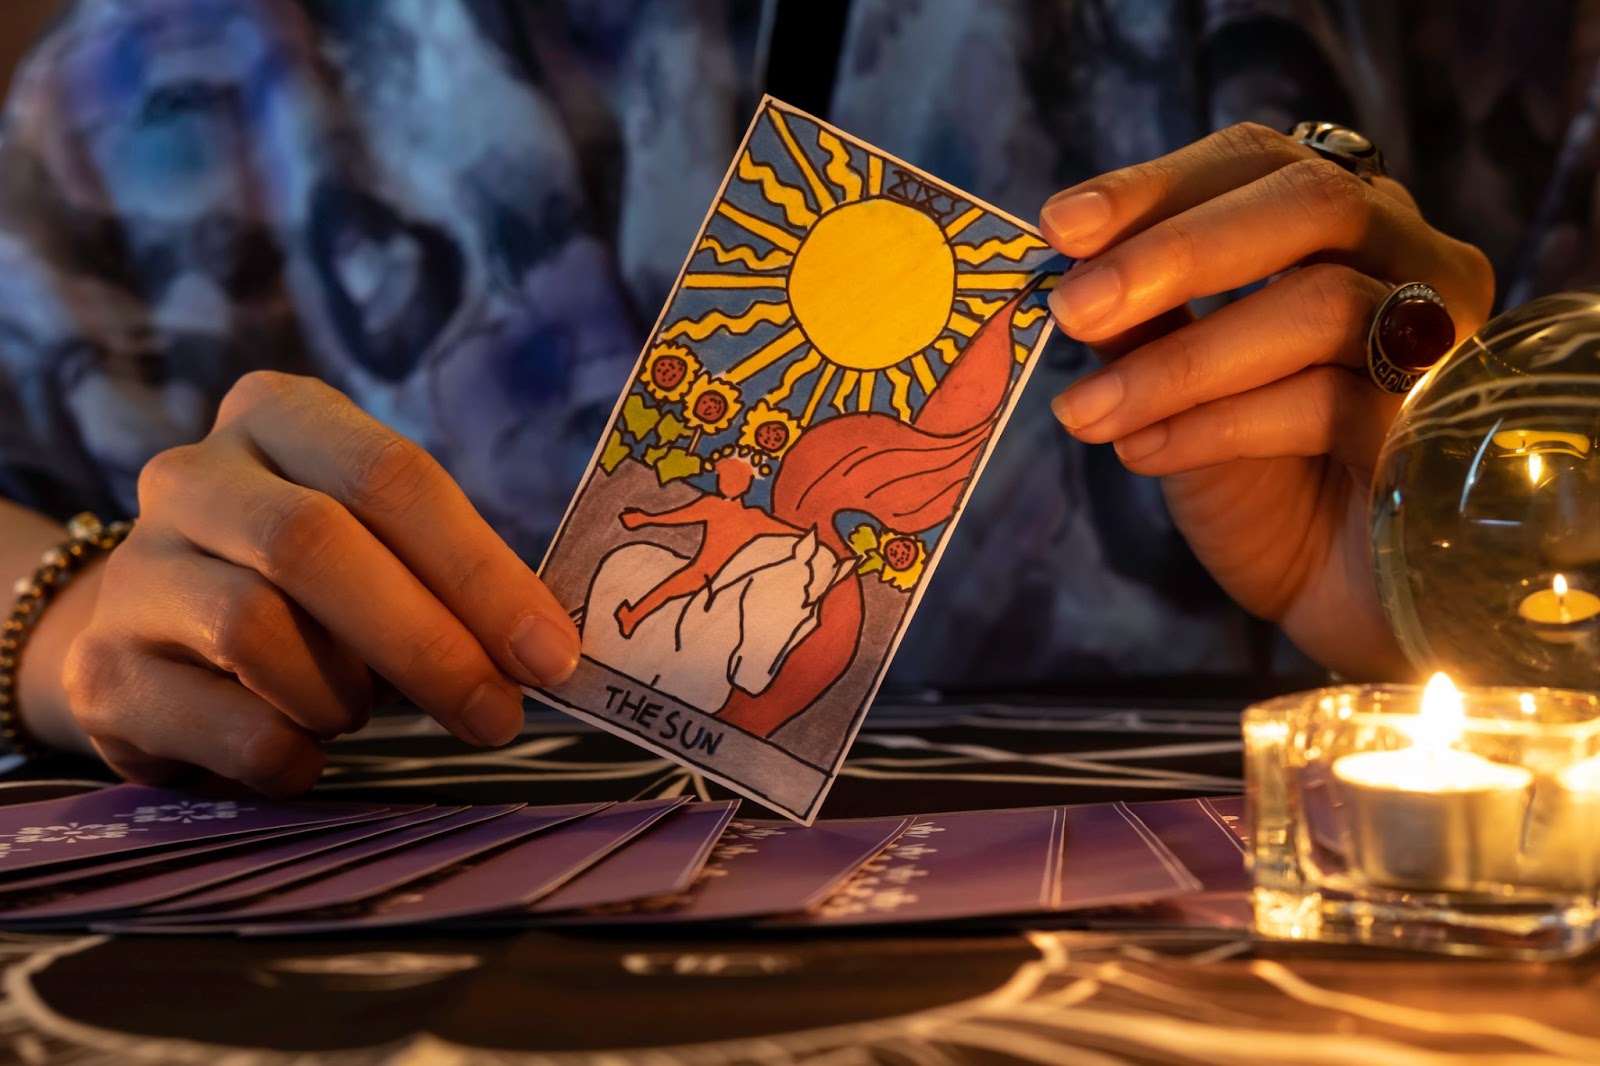 A tarot card reader holding the card "the sun" in her hands. 